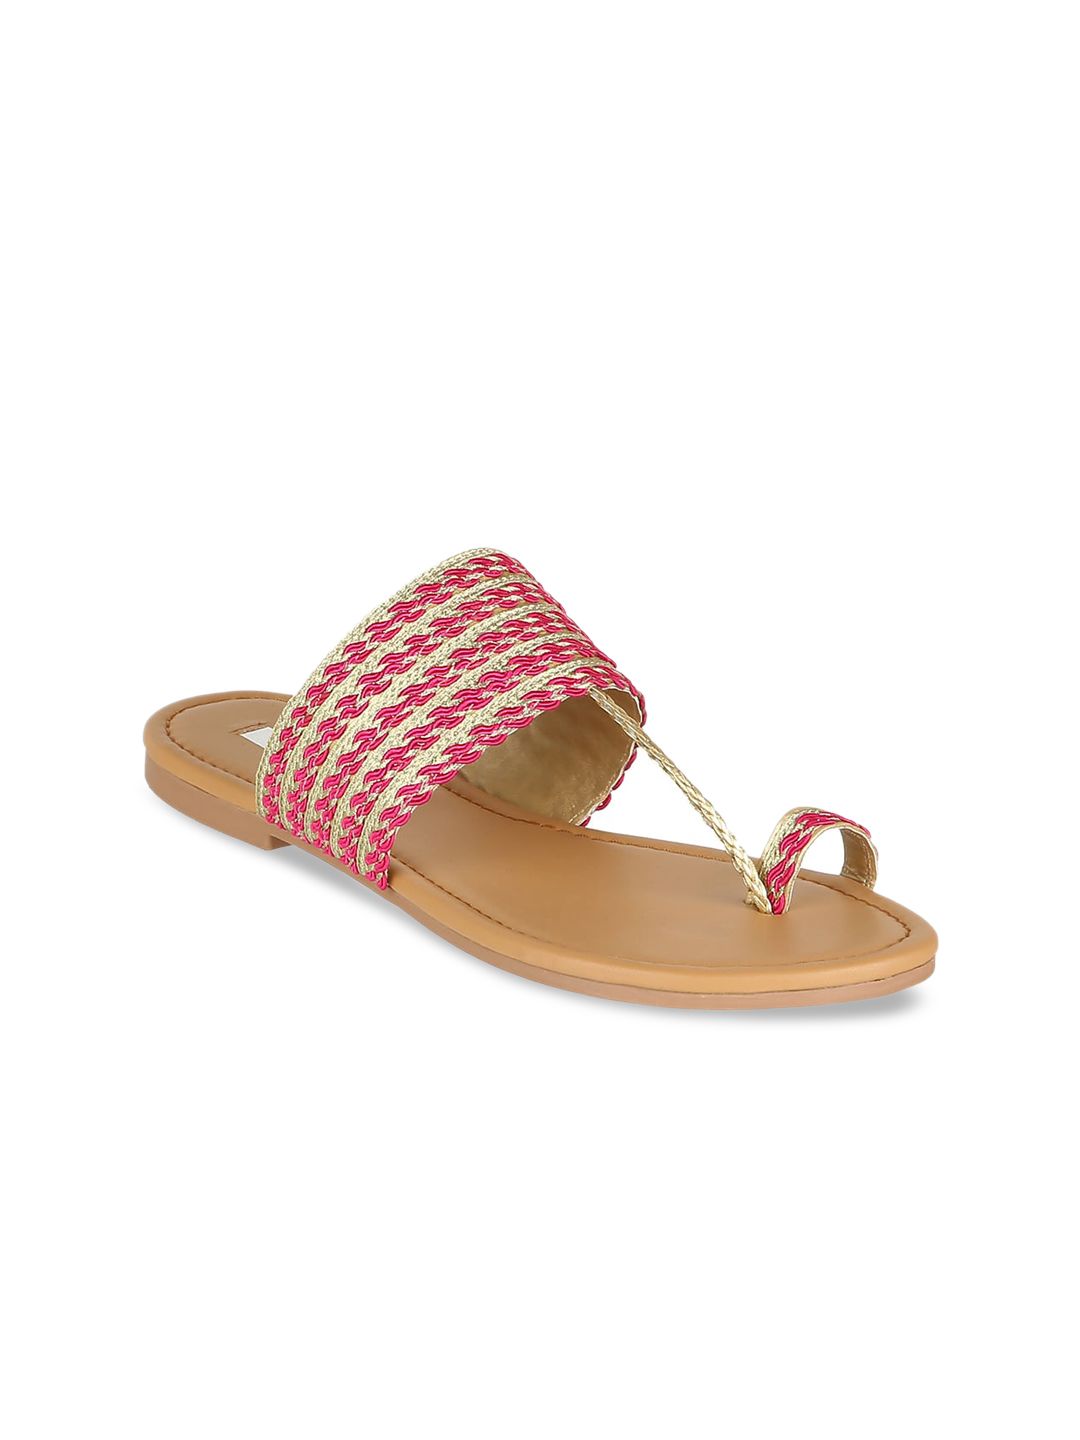 ELLE Women Pink Woven Design One Toe Flats Price in India